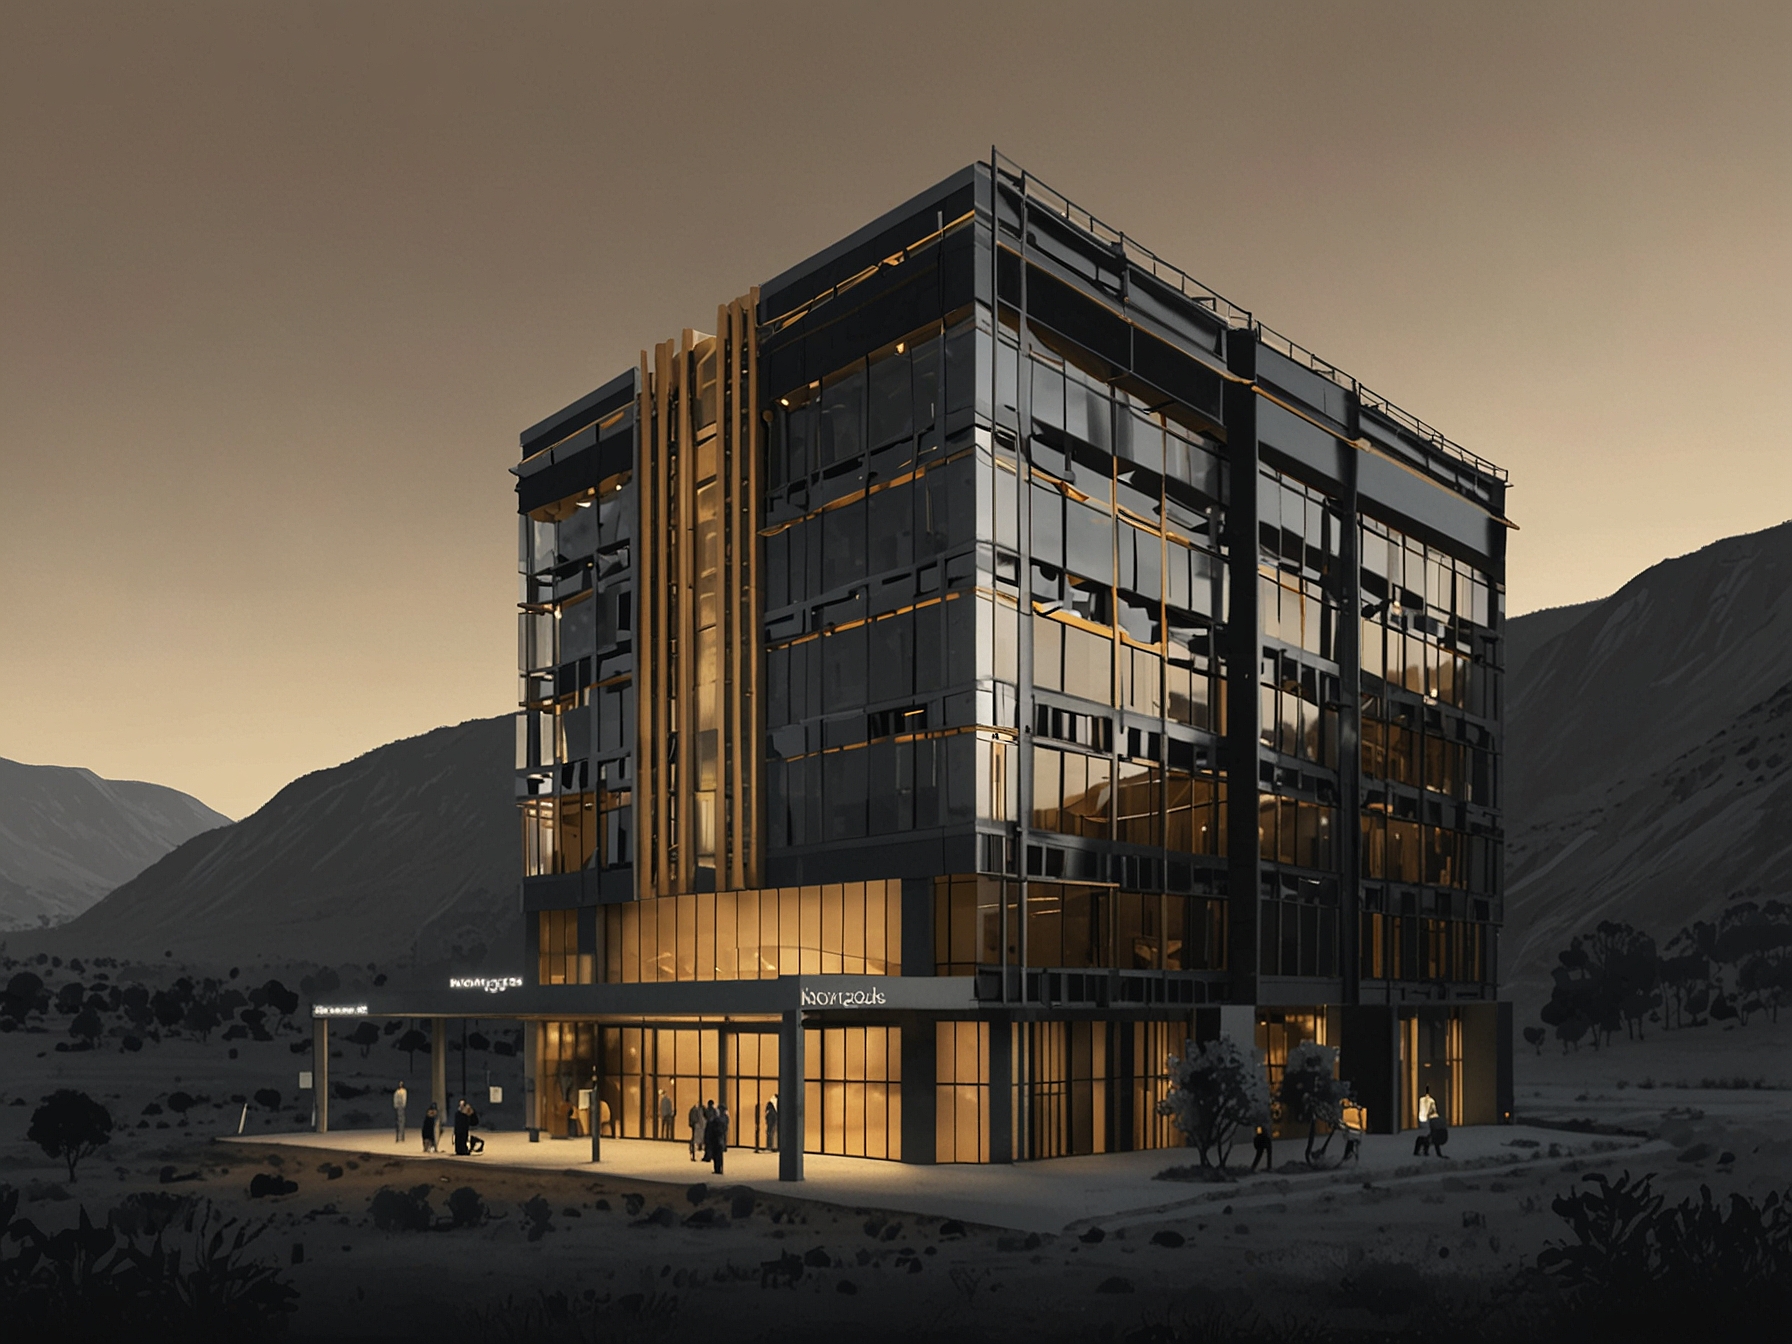 NovaGold's headquarters, showcasing the company's commitment to growth and innovation in the mining sector. The appointment of Peter Adamek as CFO underlines this forward-looking vision.